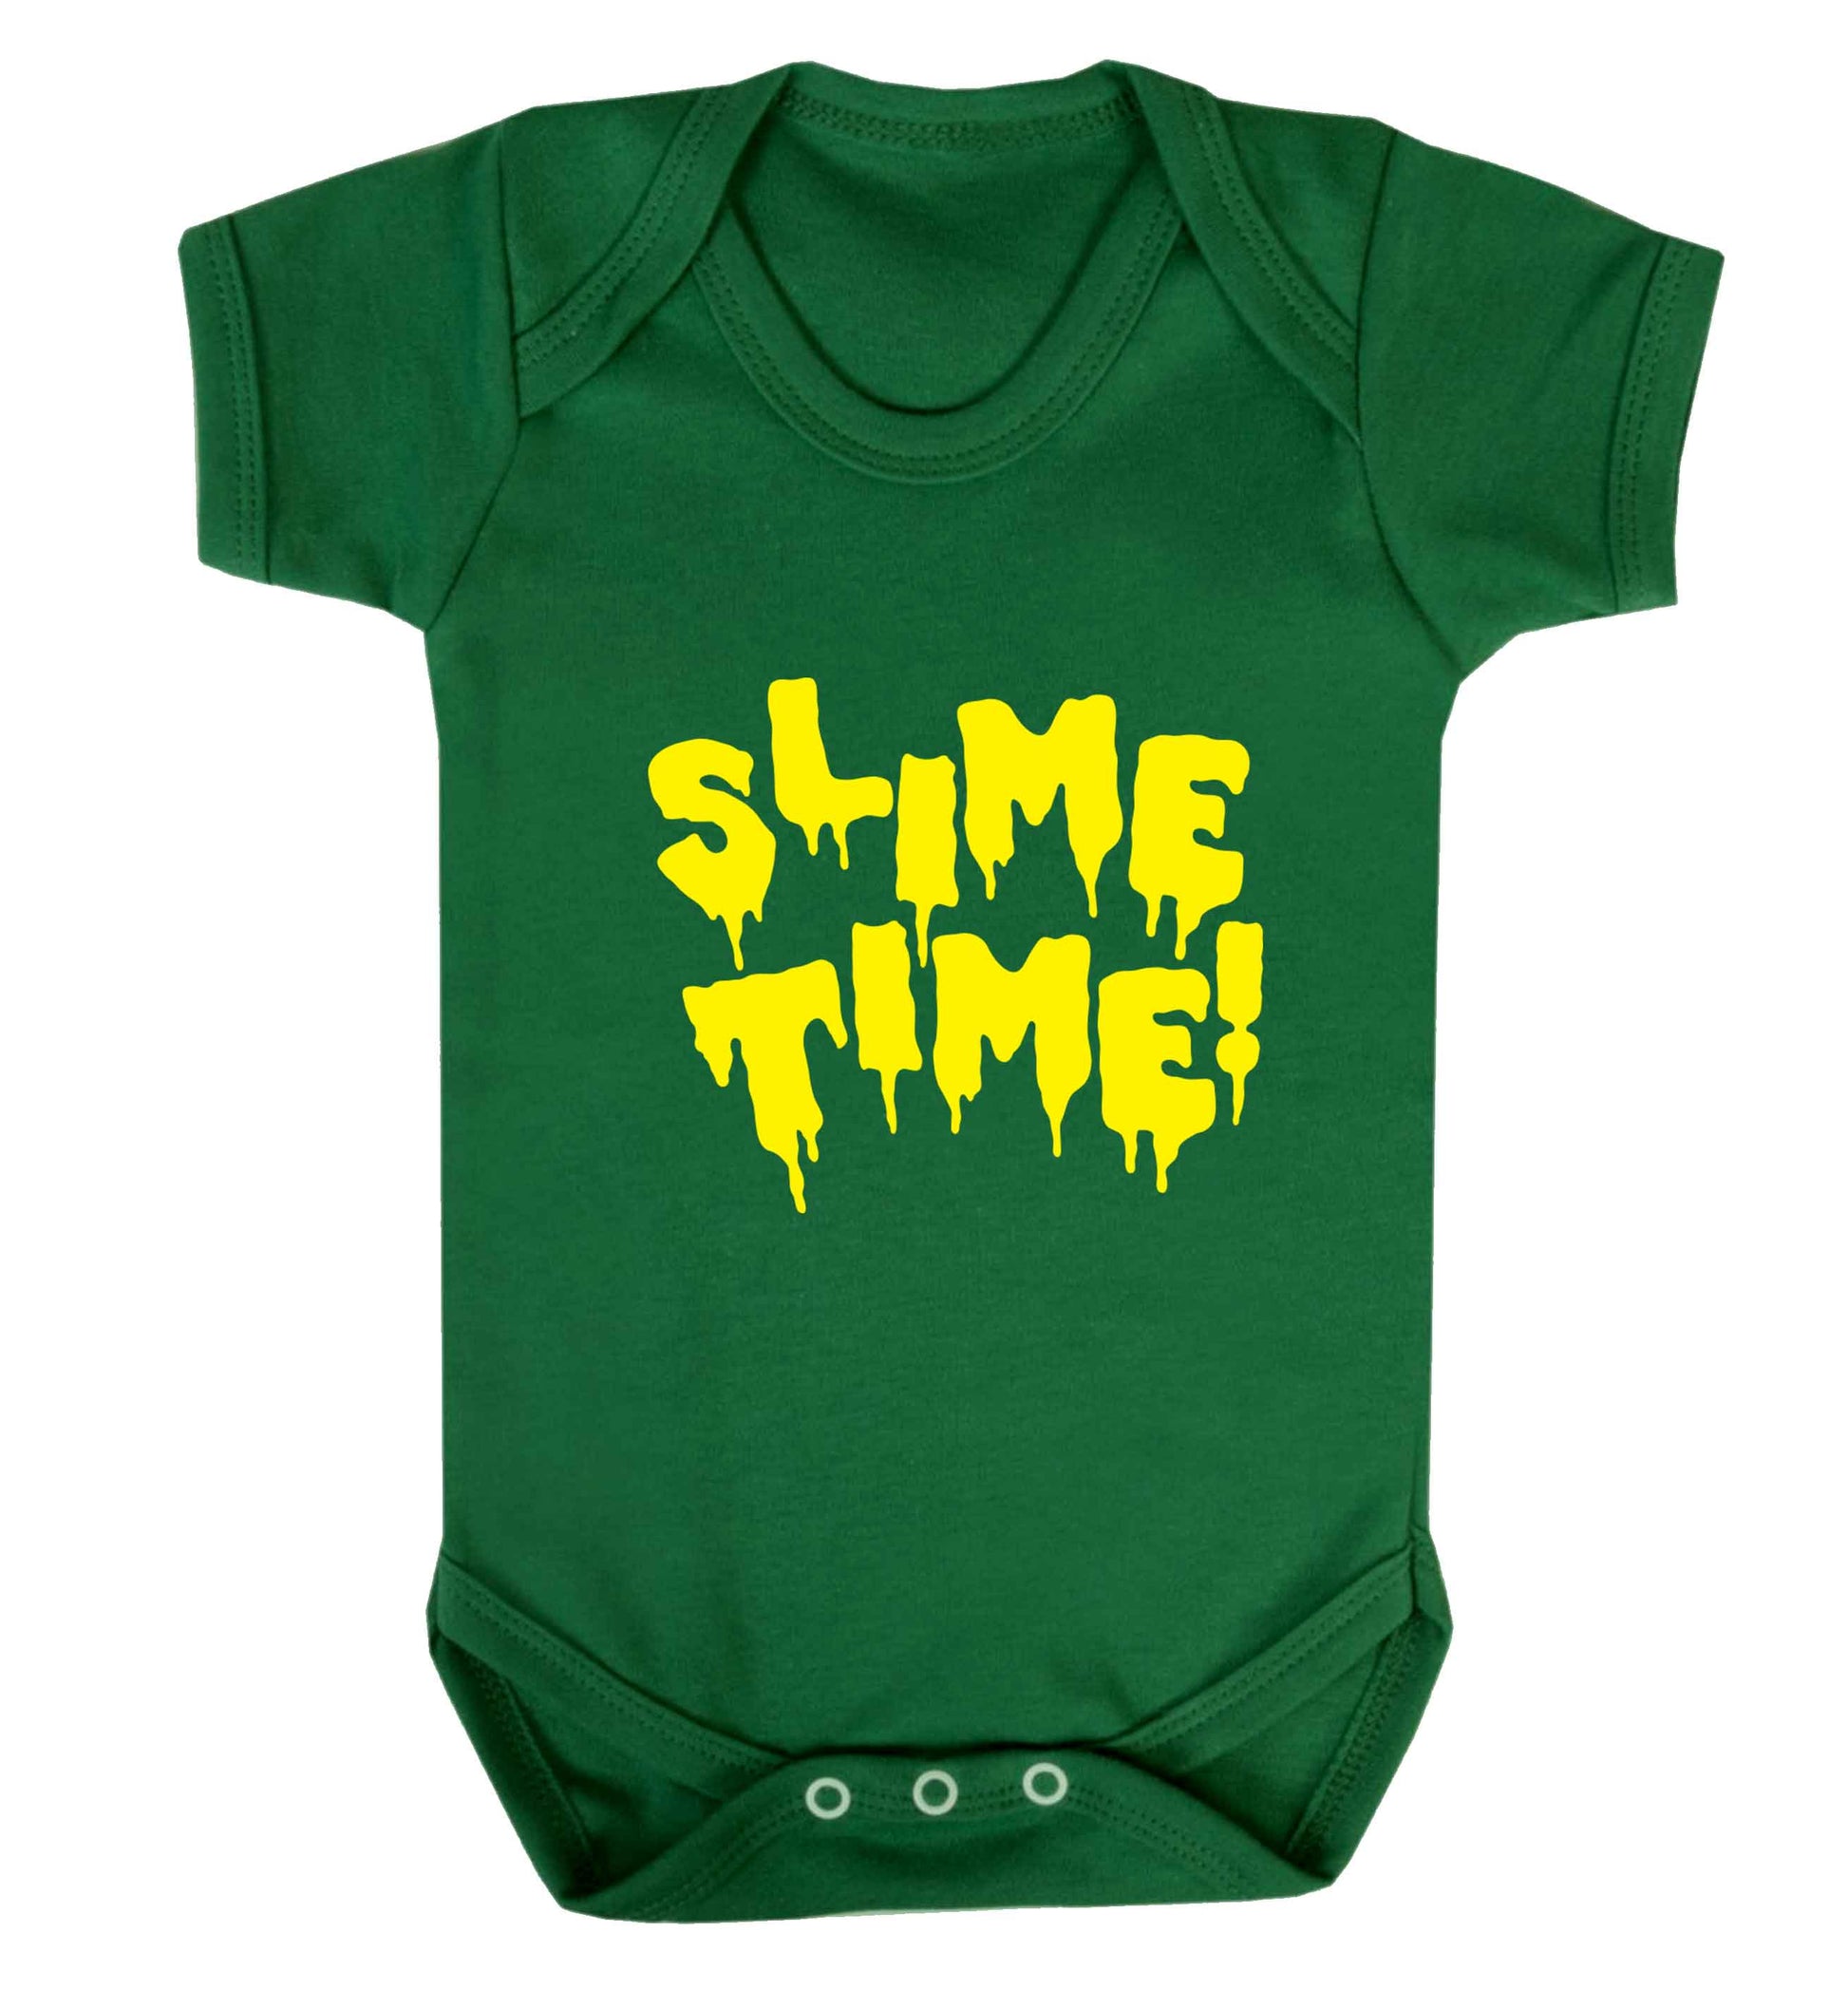 Neon yellow slime time baby vest green 18-24 months